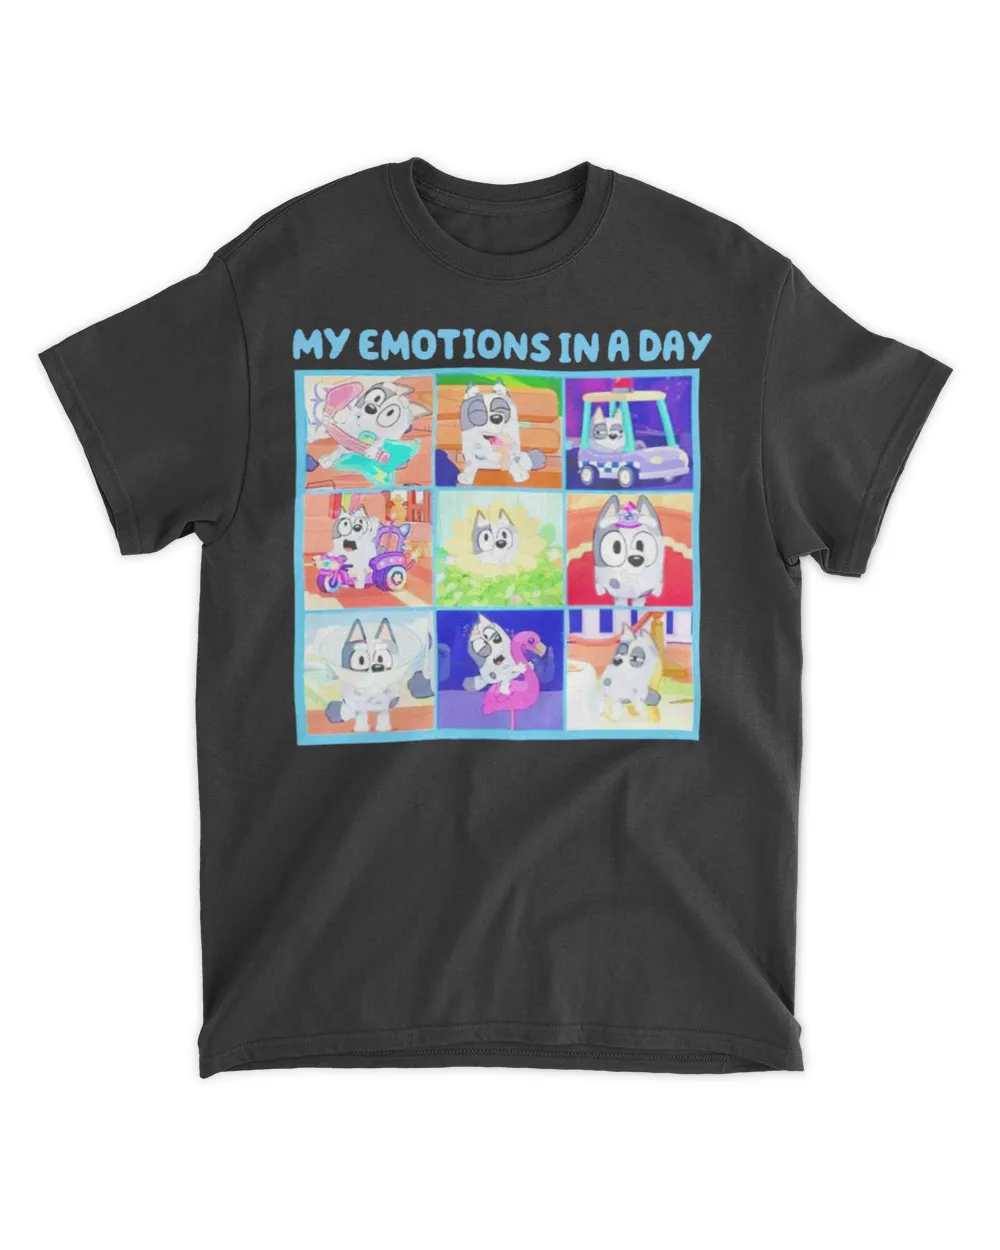  My emotions in a day shirt